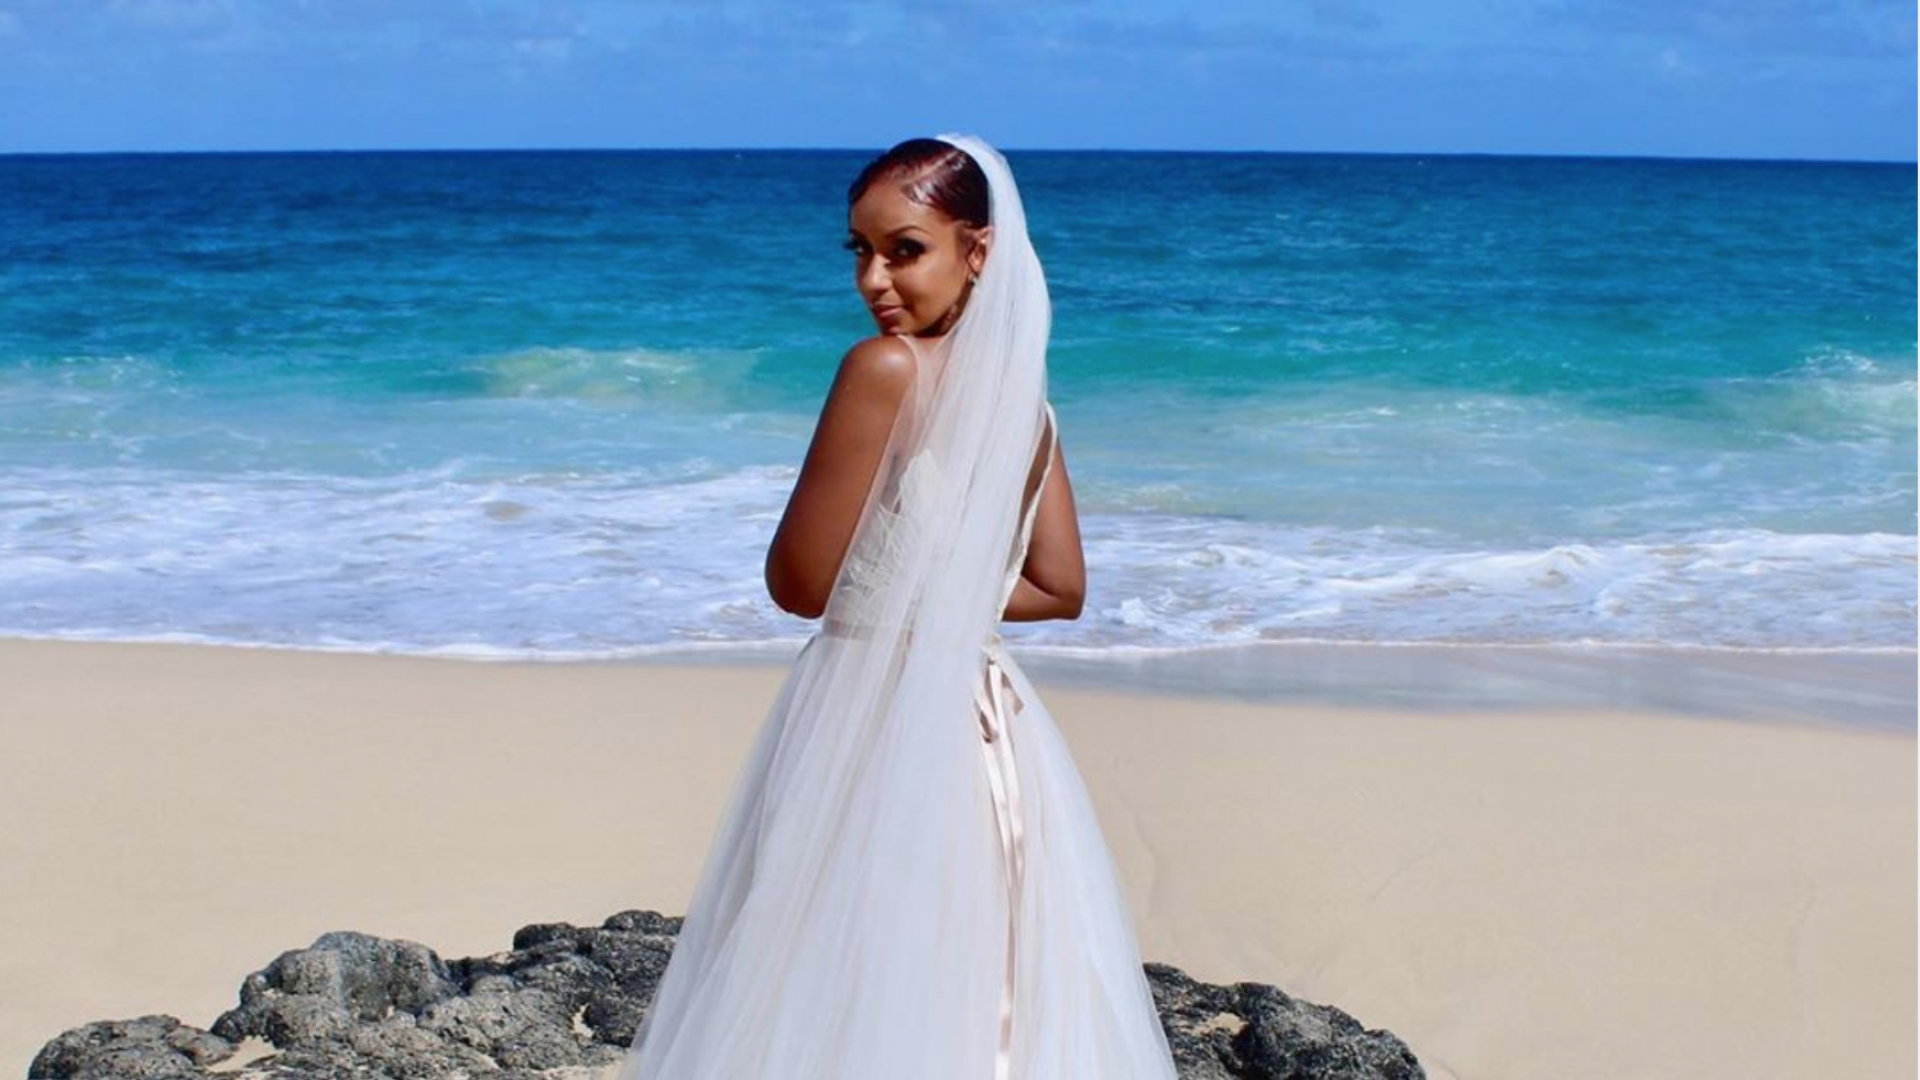 Singer Mýa Confirms She Is Married, But Keeps Us Guessing About Her New Hubby